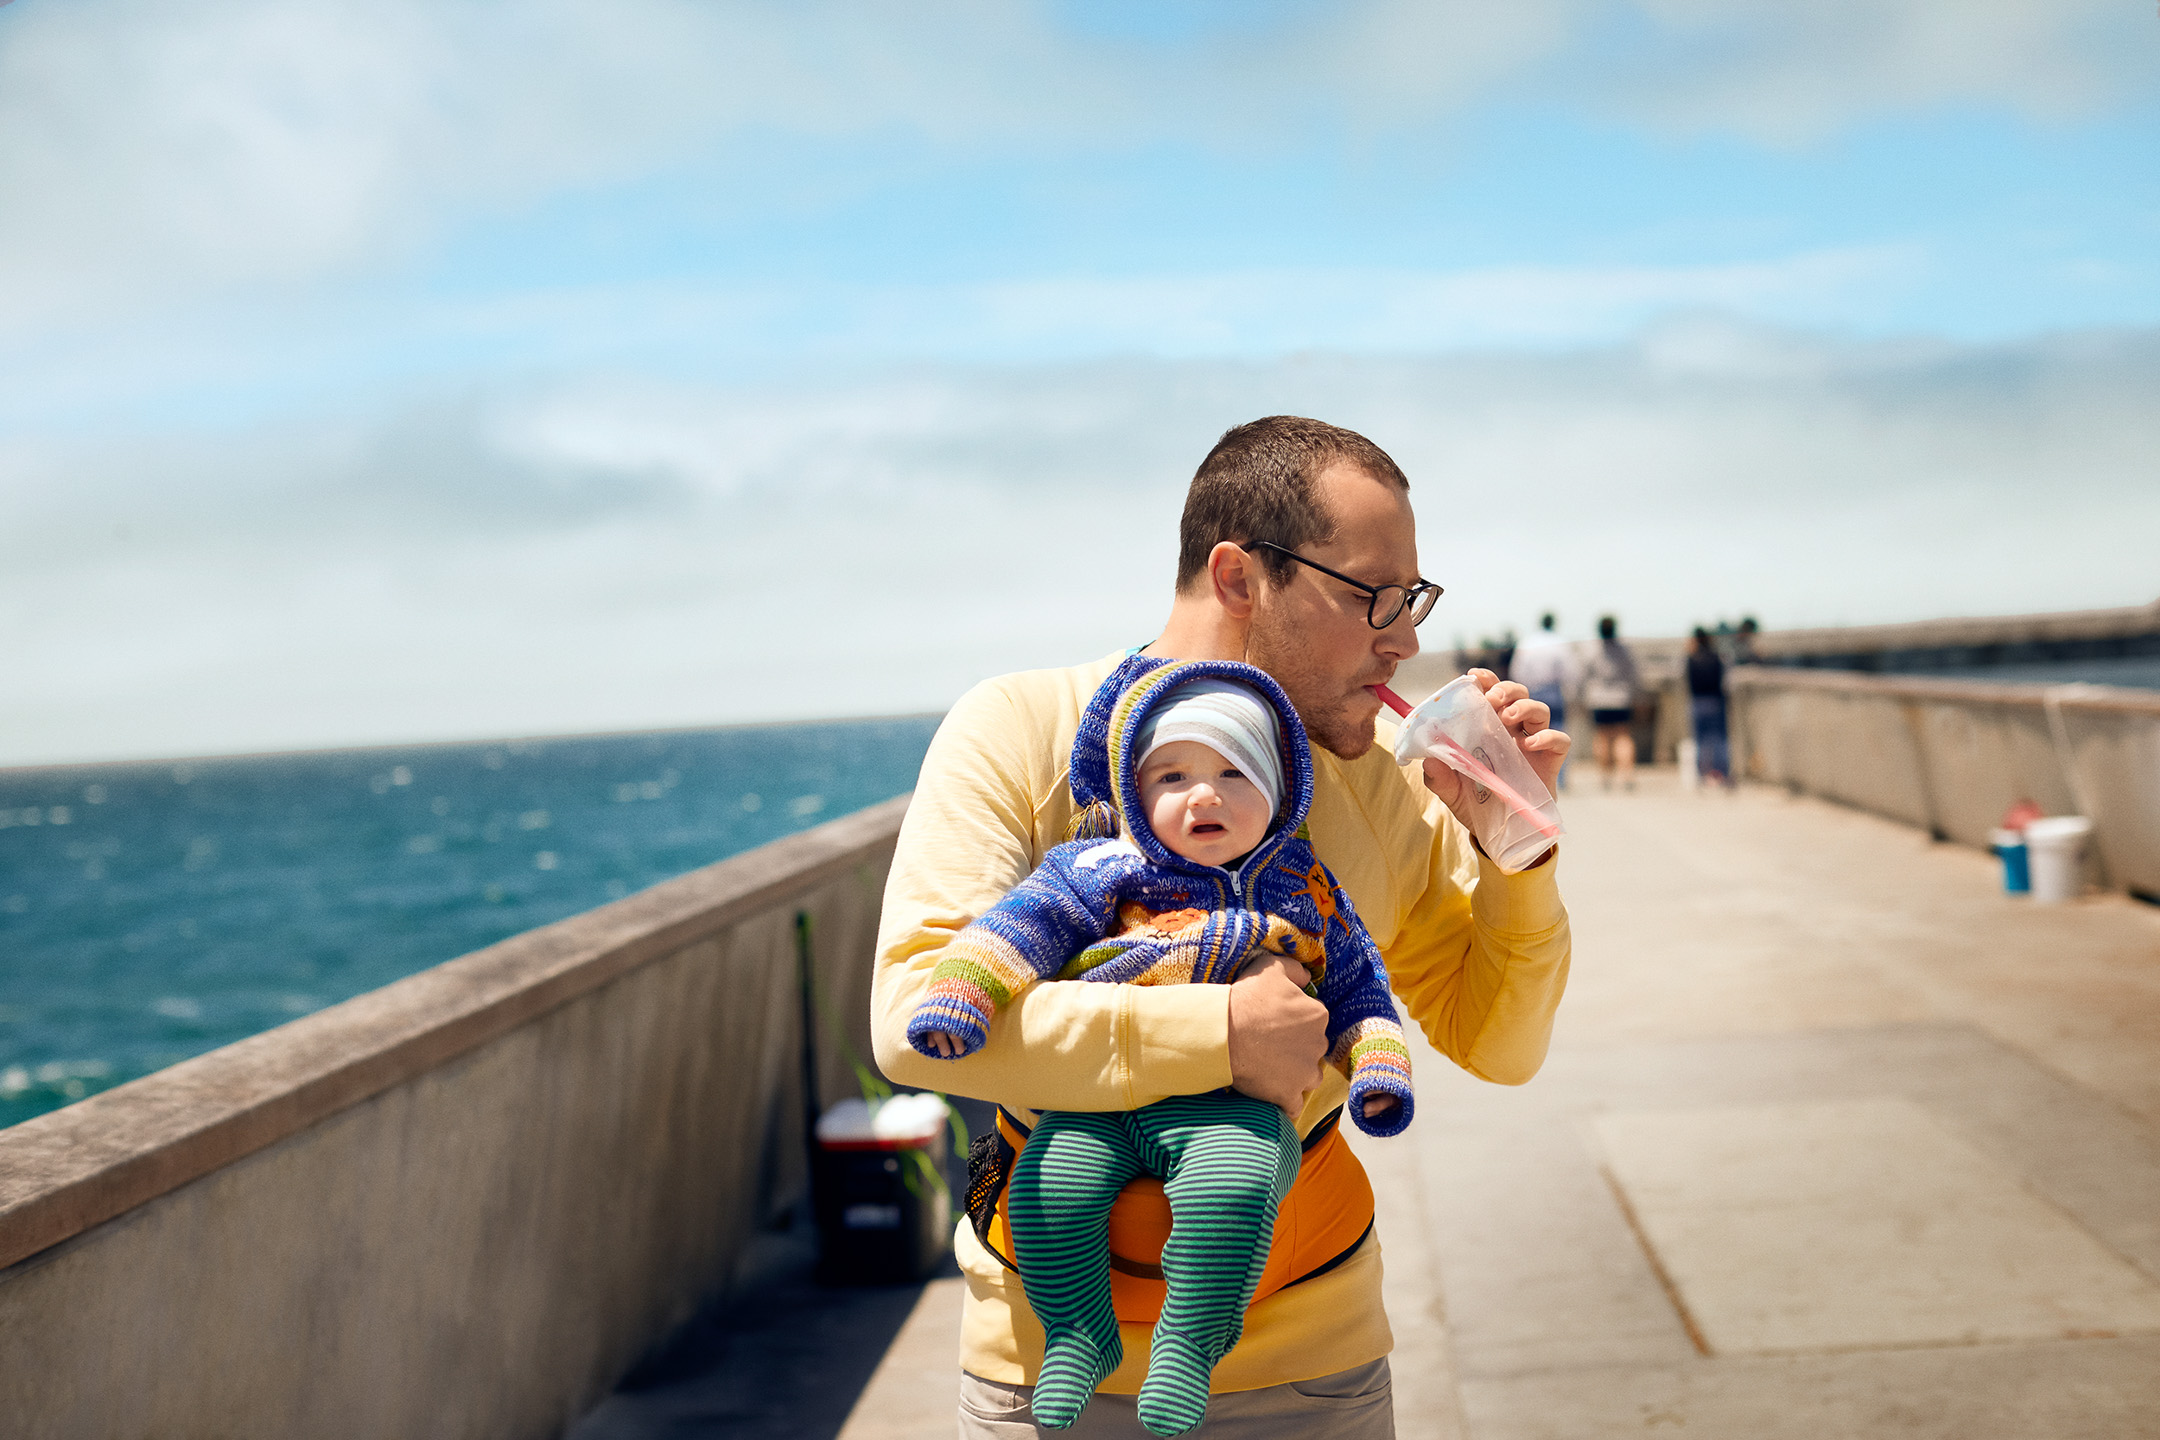 A man drinks boba on a boardwalk by the ocean while holding his infant son